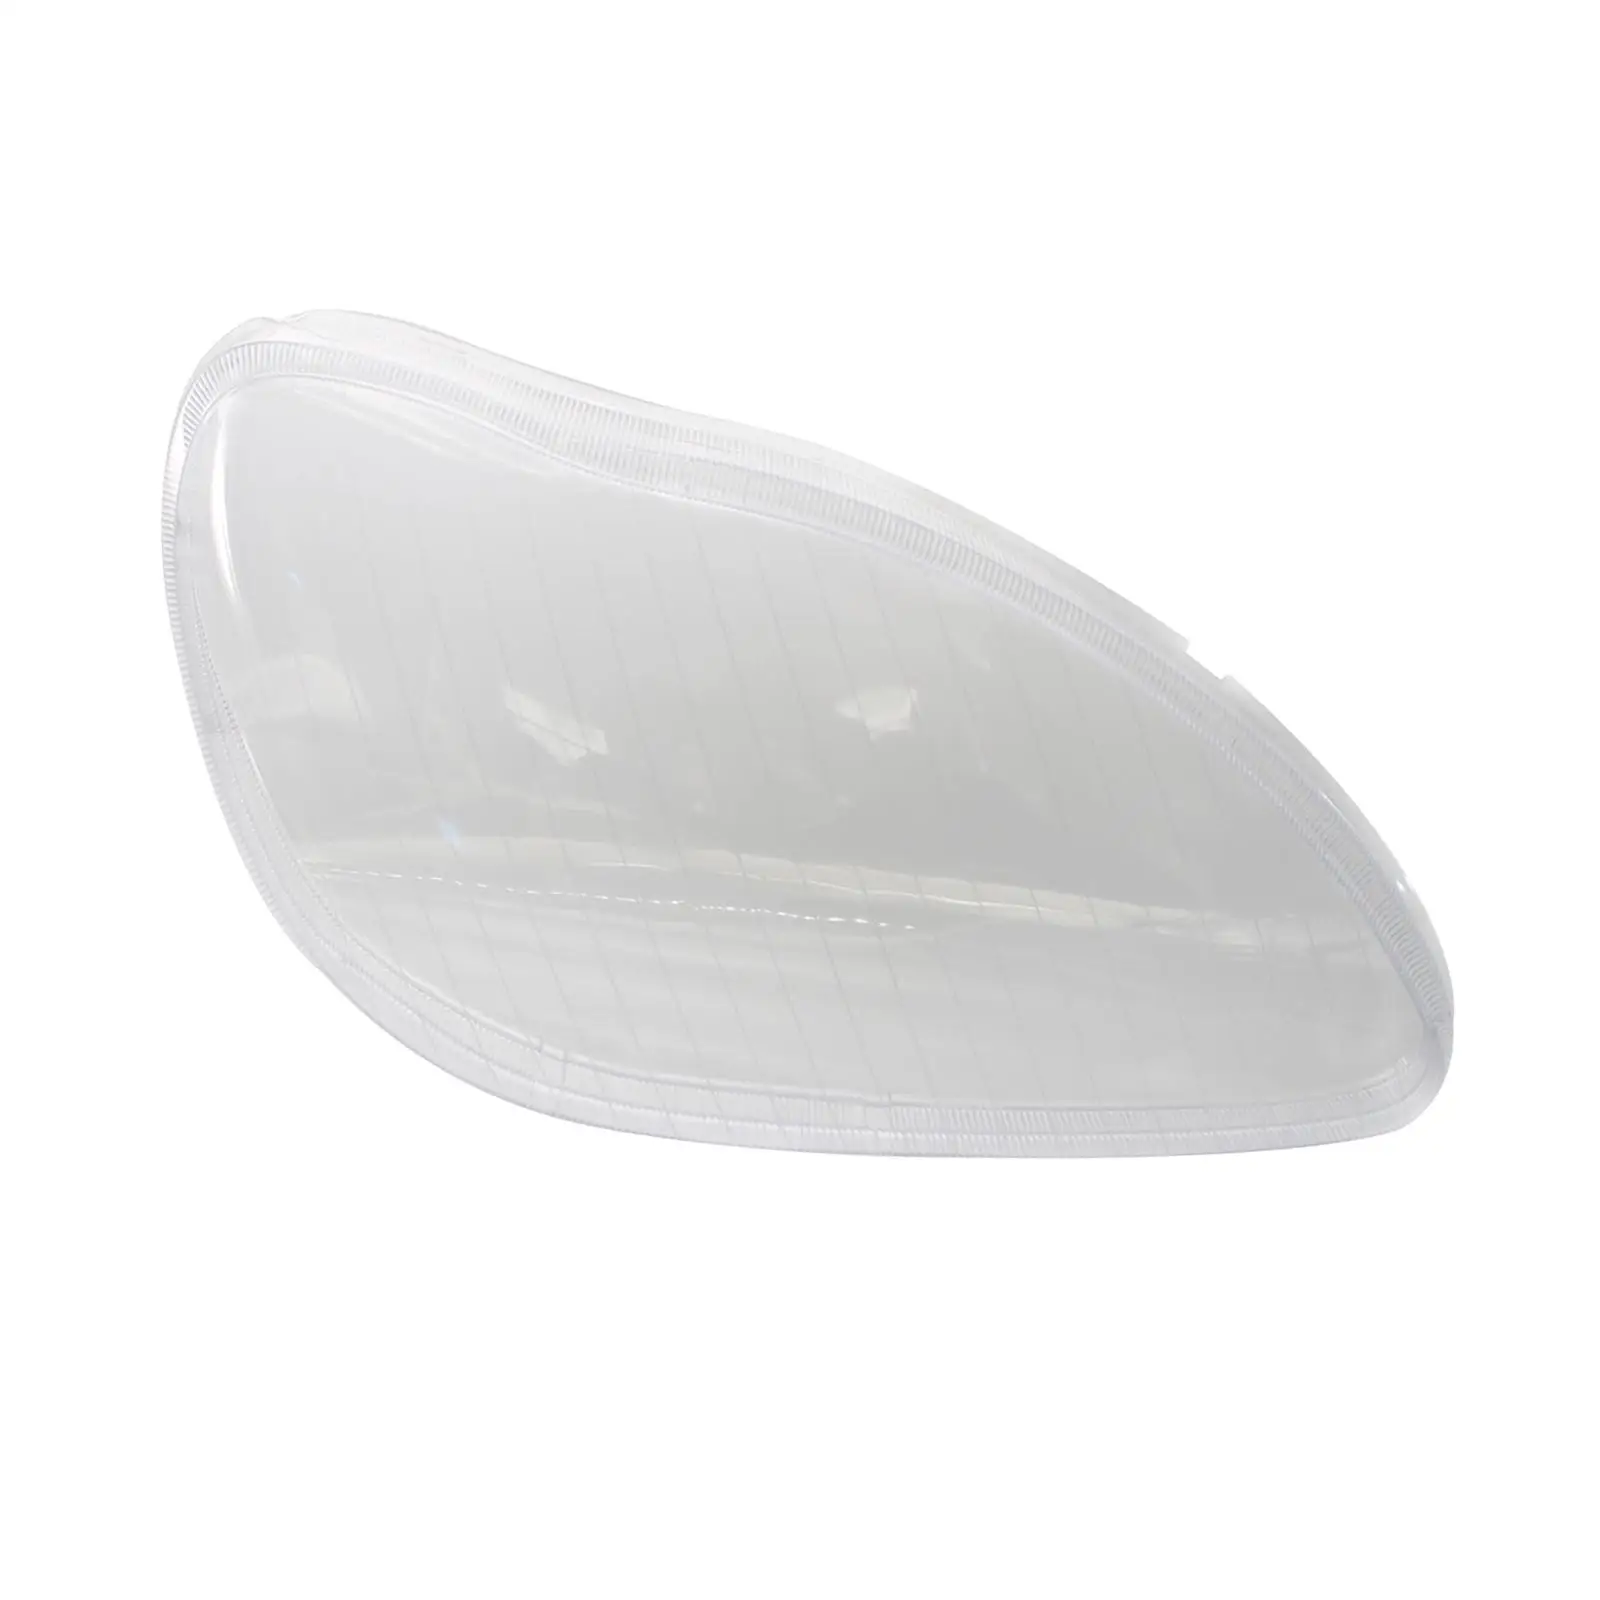 Headlight Lens Cover 2208204461 Replacement Vehicle Durable Accessory Clear for Mercedes-benz W220 S280 S350 S600 S500